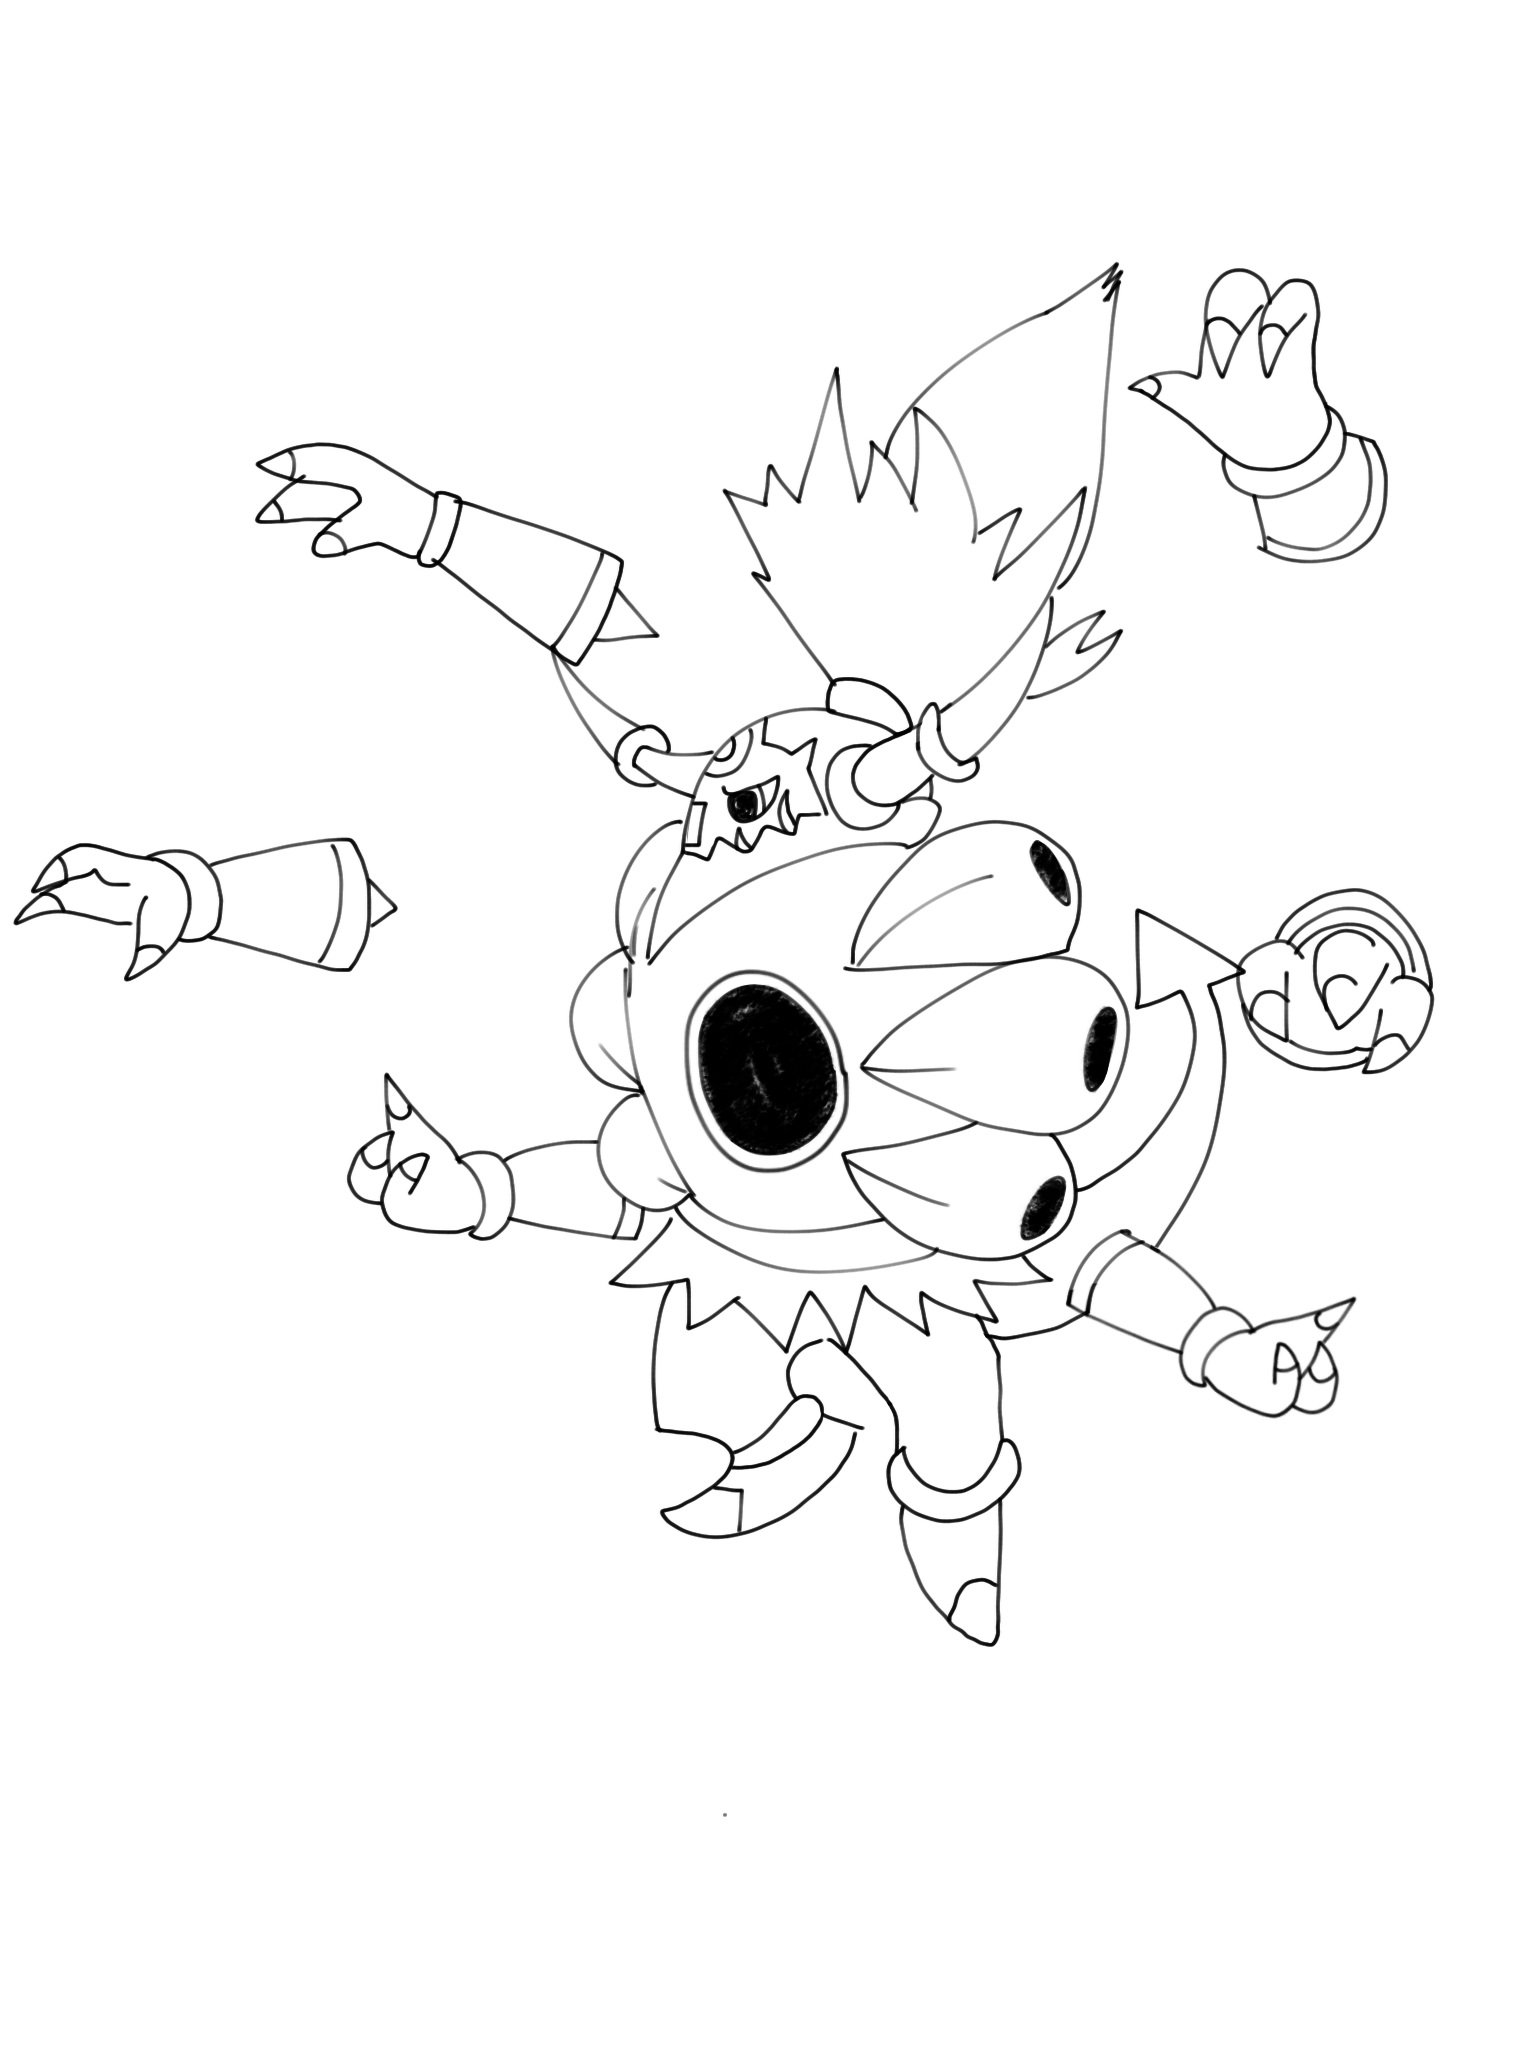 Hoopa Coloring Pages - Coloring Pages Kids 2019